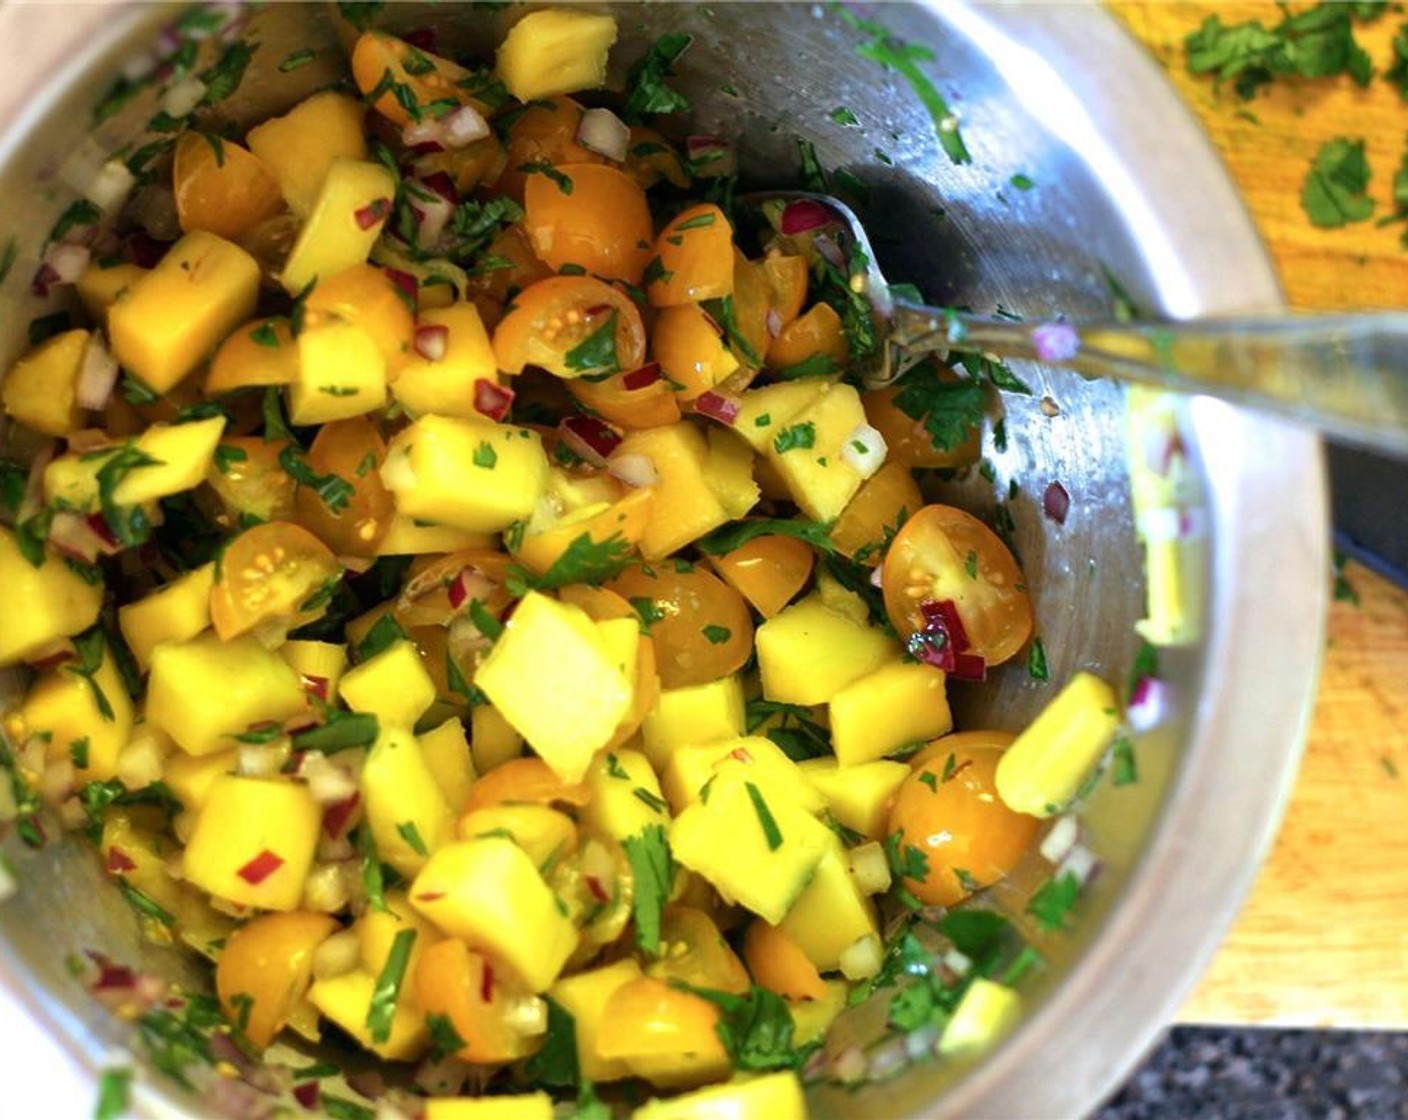 step 4 Prepare the mango salsa by combining the Mango (1), Yellow Cherry Tomato (1 cup), Fresh Cilantro (2 Tbsp), Red Onions (2 Tbsp), Fresh Ginger (1/2 tsp), Lime (1), and Salt (1/2 tsp) in a bowl. Set aside to let those flavors mingle.